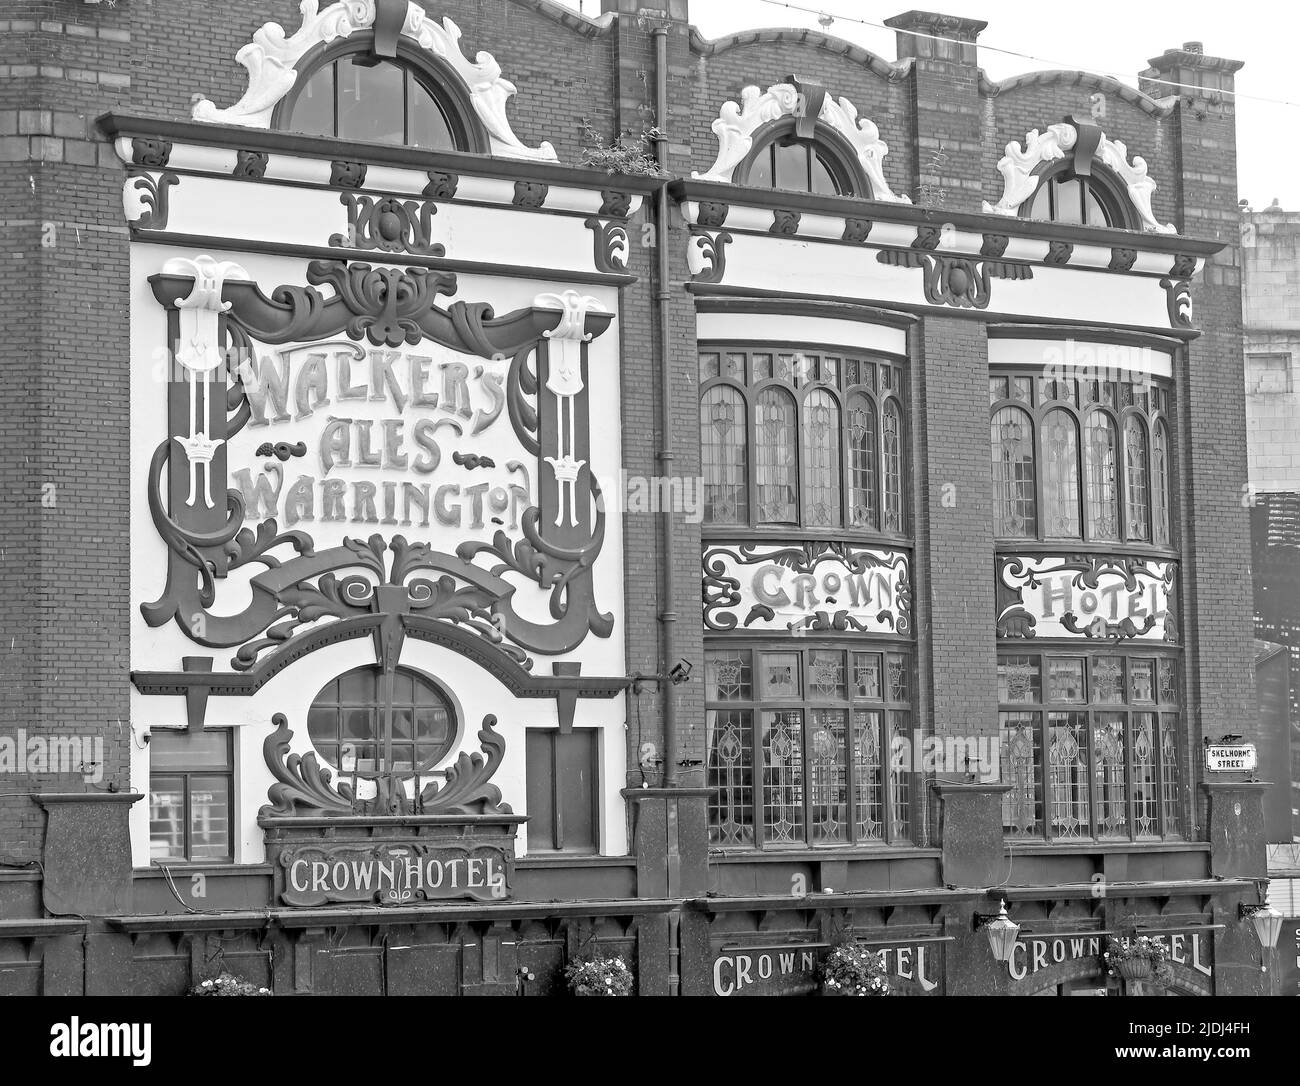 The Crown Hotel, Walkers Ales aus Warrington, 43 Lime Street , Liverpool, Merseyside, England, L1 1NY in BW Stockfoto